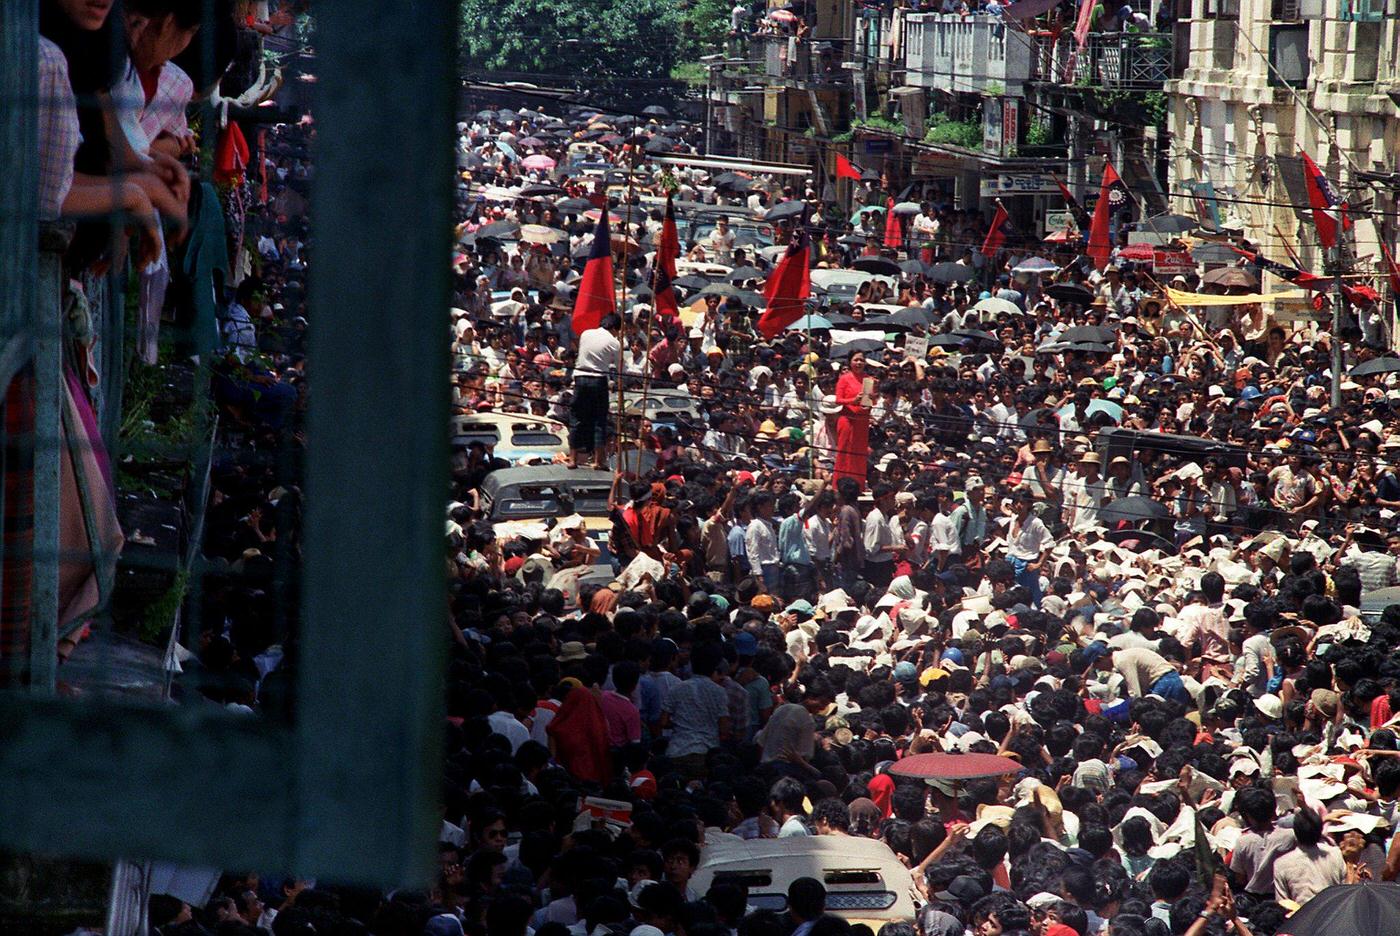 Burmese woman leading anti-government protestors in Rangoon during the 8888 Uprising, 1988.